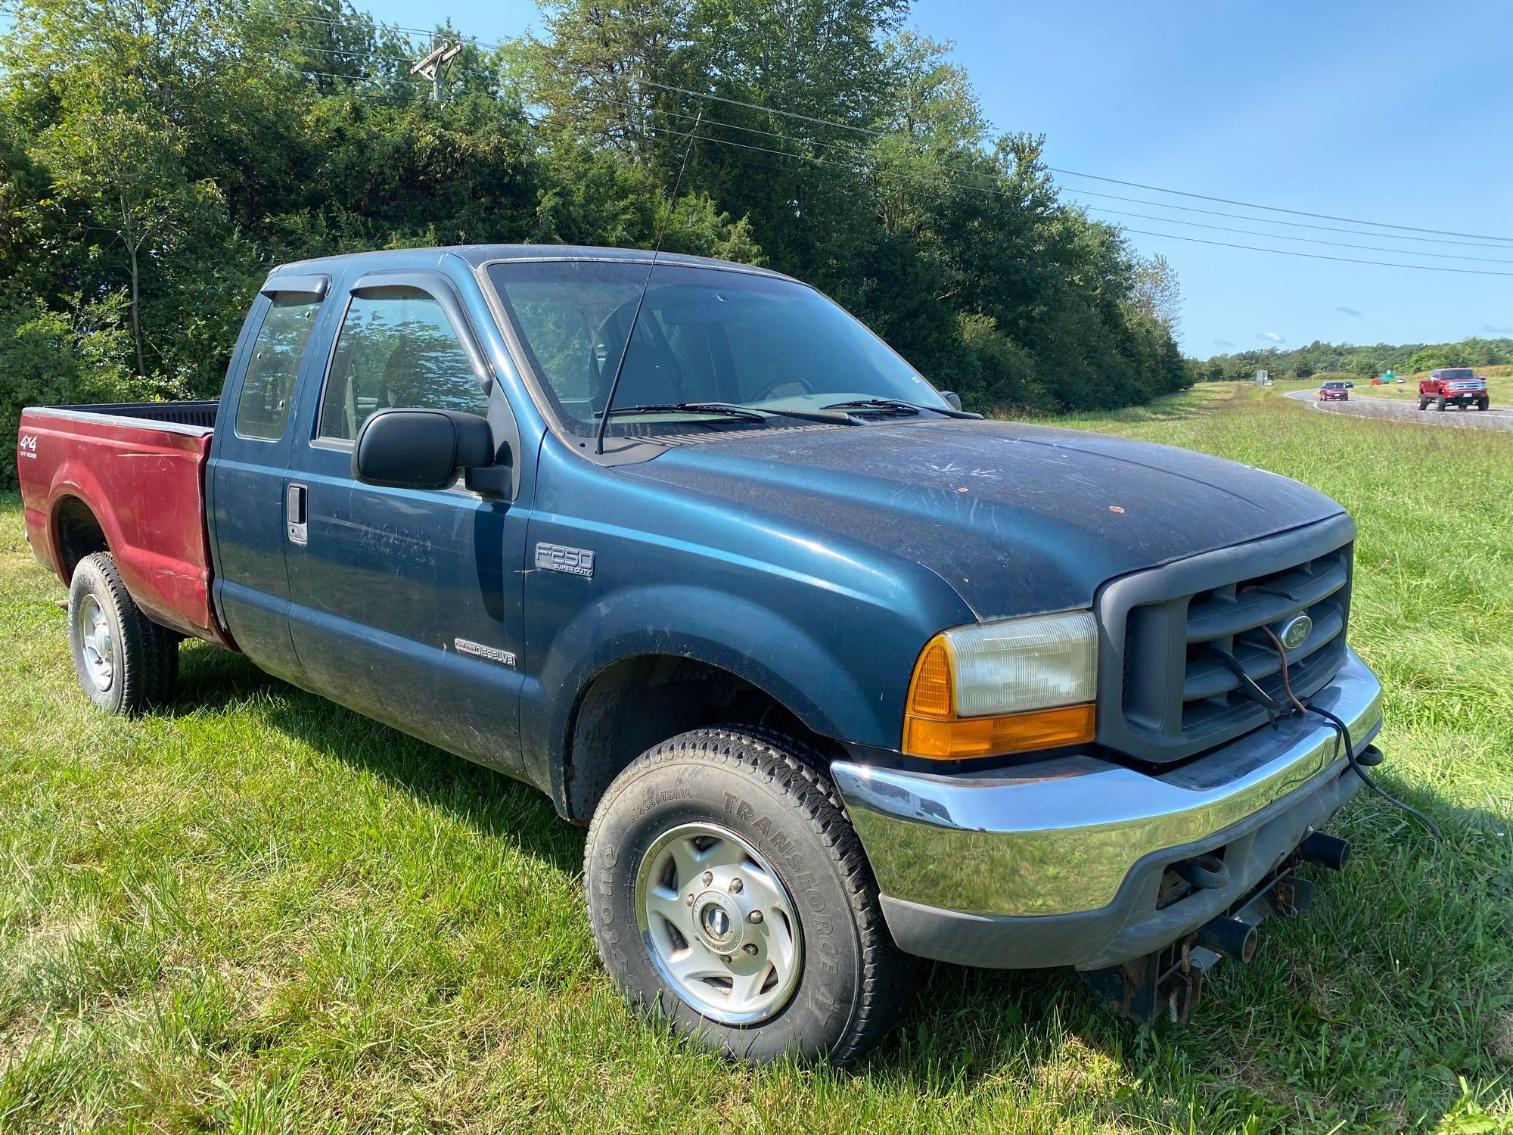 Image for 1999 Ford F-250, Ext Cab, 7.3L Diesel, New Tires, Etc. VIN #: 1FTNX21F7XEE57966 Mileage:  293,952